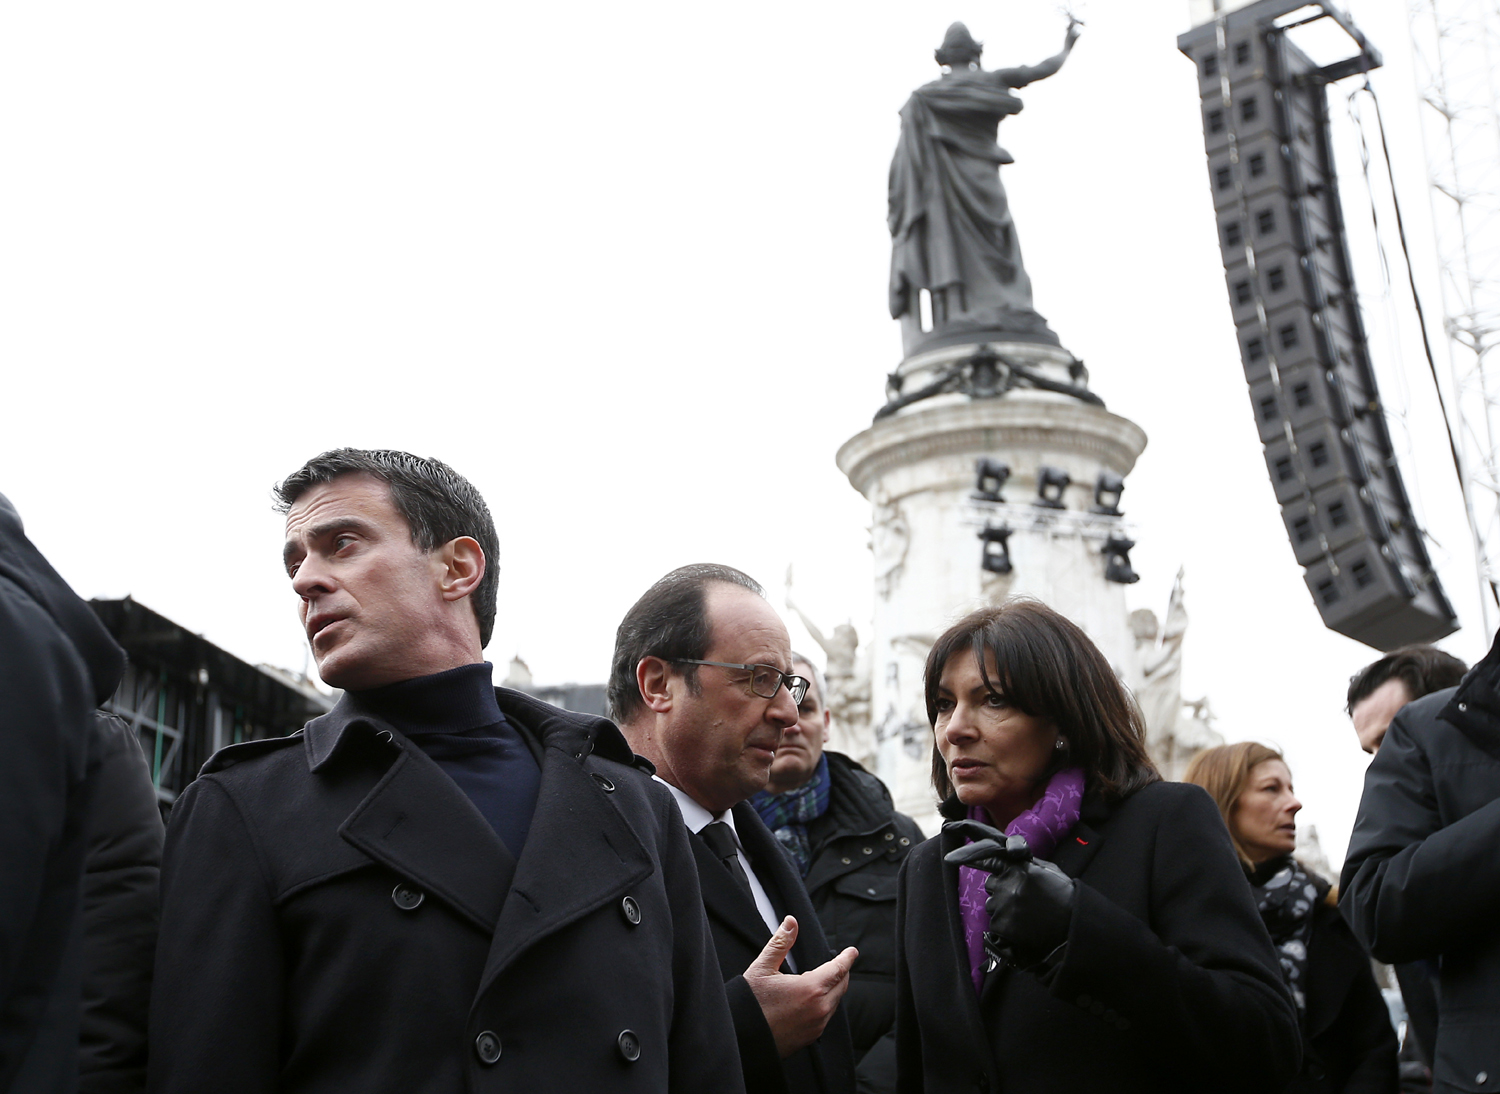 (From L) French Prime minister Manuel Valls, French President Francois Hollande and French Paris' mayor Anne Hidalgo attend a remembrance rally at Place de la Republique (Republic square) on January 10, 2016 to mark a year since 1.6 million people thronged the French capital in a show of unity after attacks on the Charlie Hebdo newspaper and a Jewish supermarket. Just as it was last year, the vast Place de la Republique will be the focus of the gathering as people reiterate their support for freedom of expression and remember the other victims of what would become a year of jihadist outrages in France, culminating in the November 13 coordinated shootings and suicide bombings that killed 130 people and were claimed by the Islamic State (IS) group. / AFP / YOAN VALAT